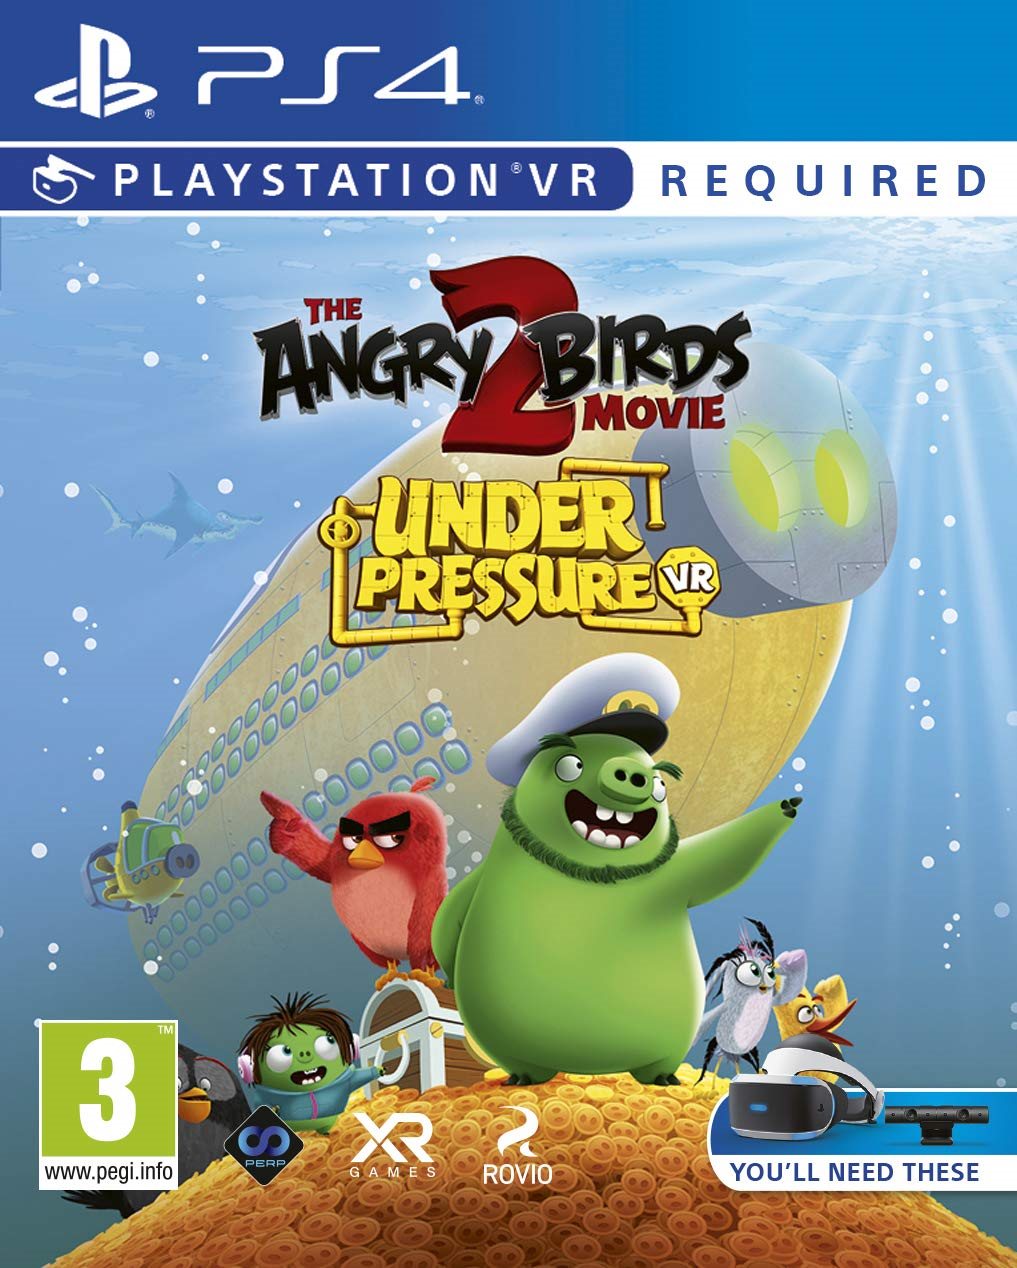 The Angry Birds Movie 2: Under Pressure VR - PS4 VR